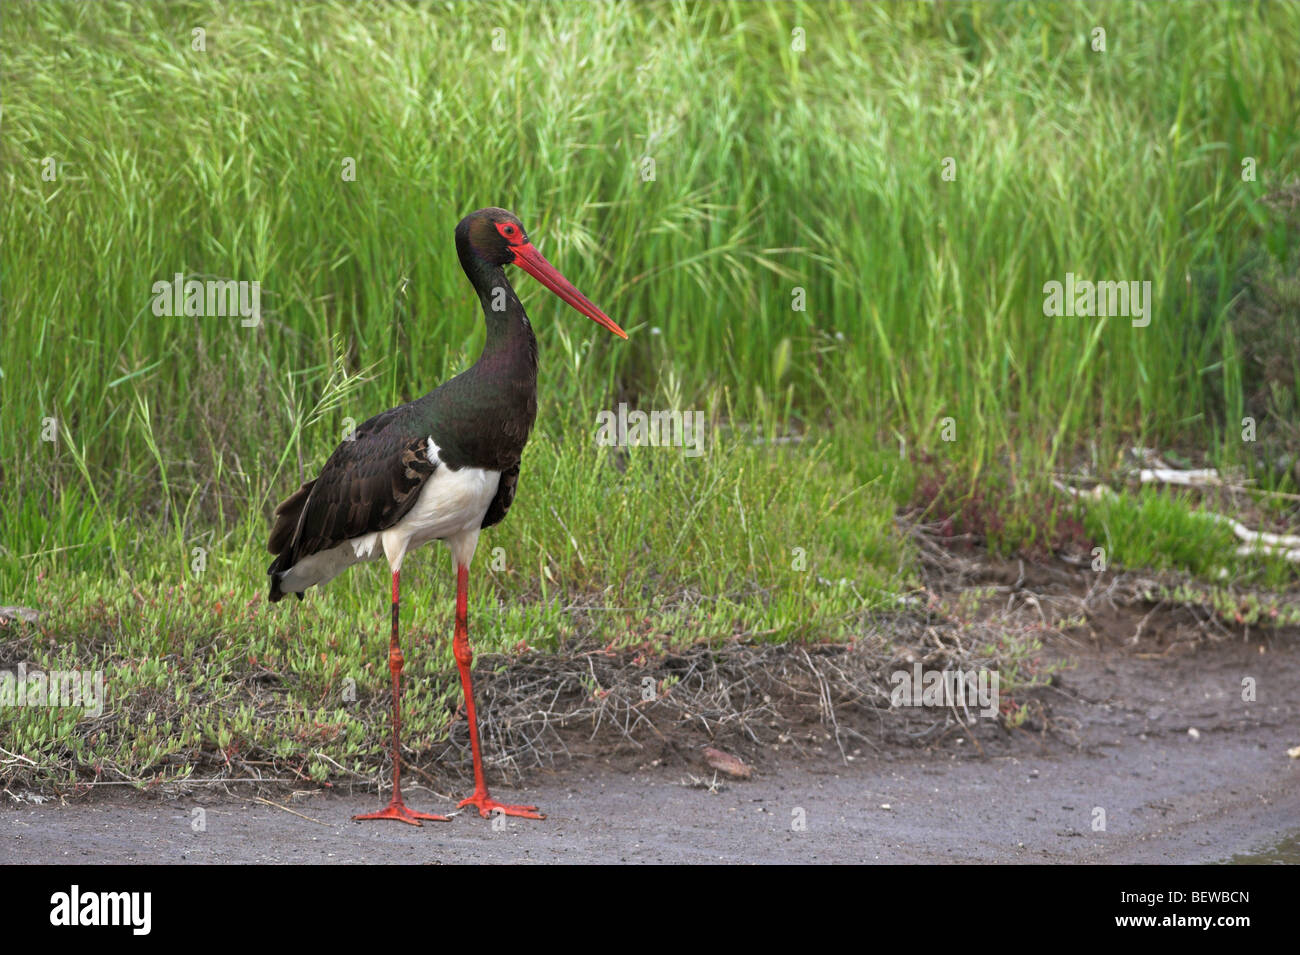 Black Stork (Ciconia nigra) standing on dirt track, side view Stock Photo